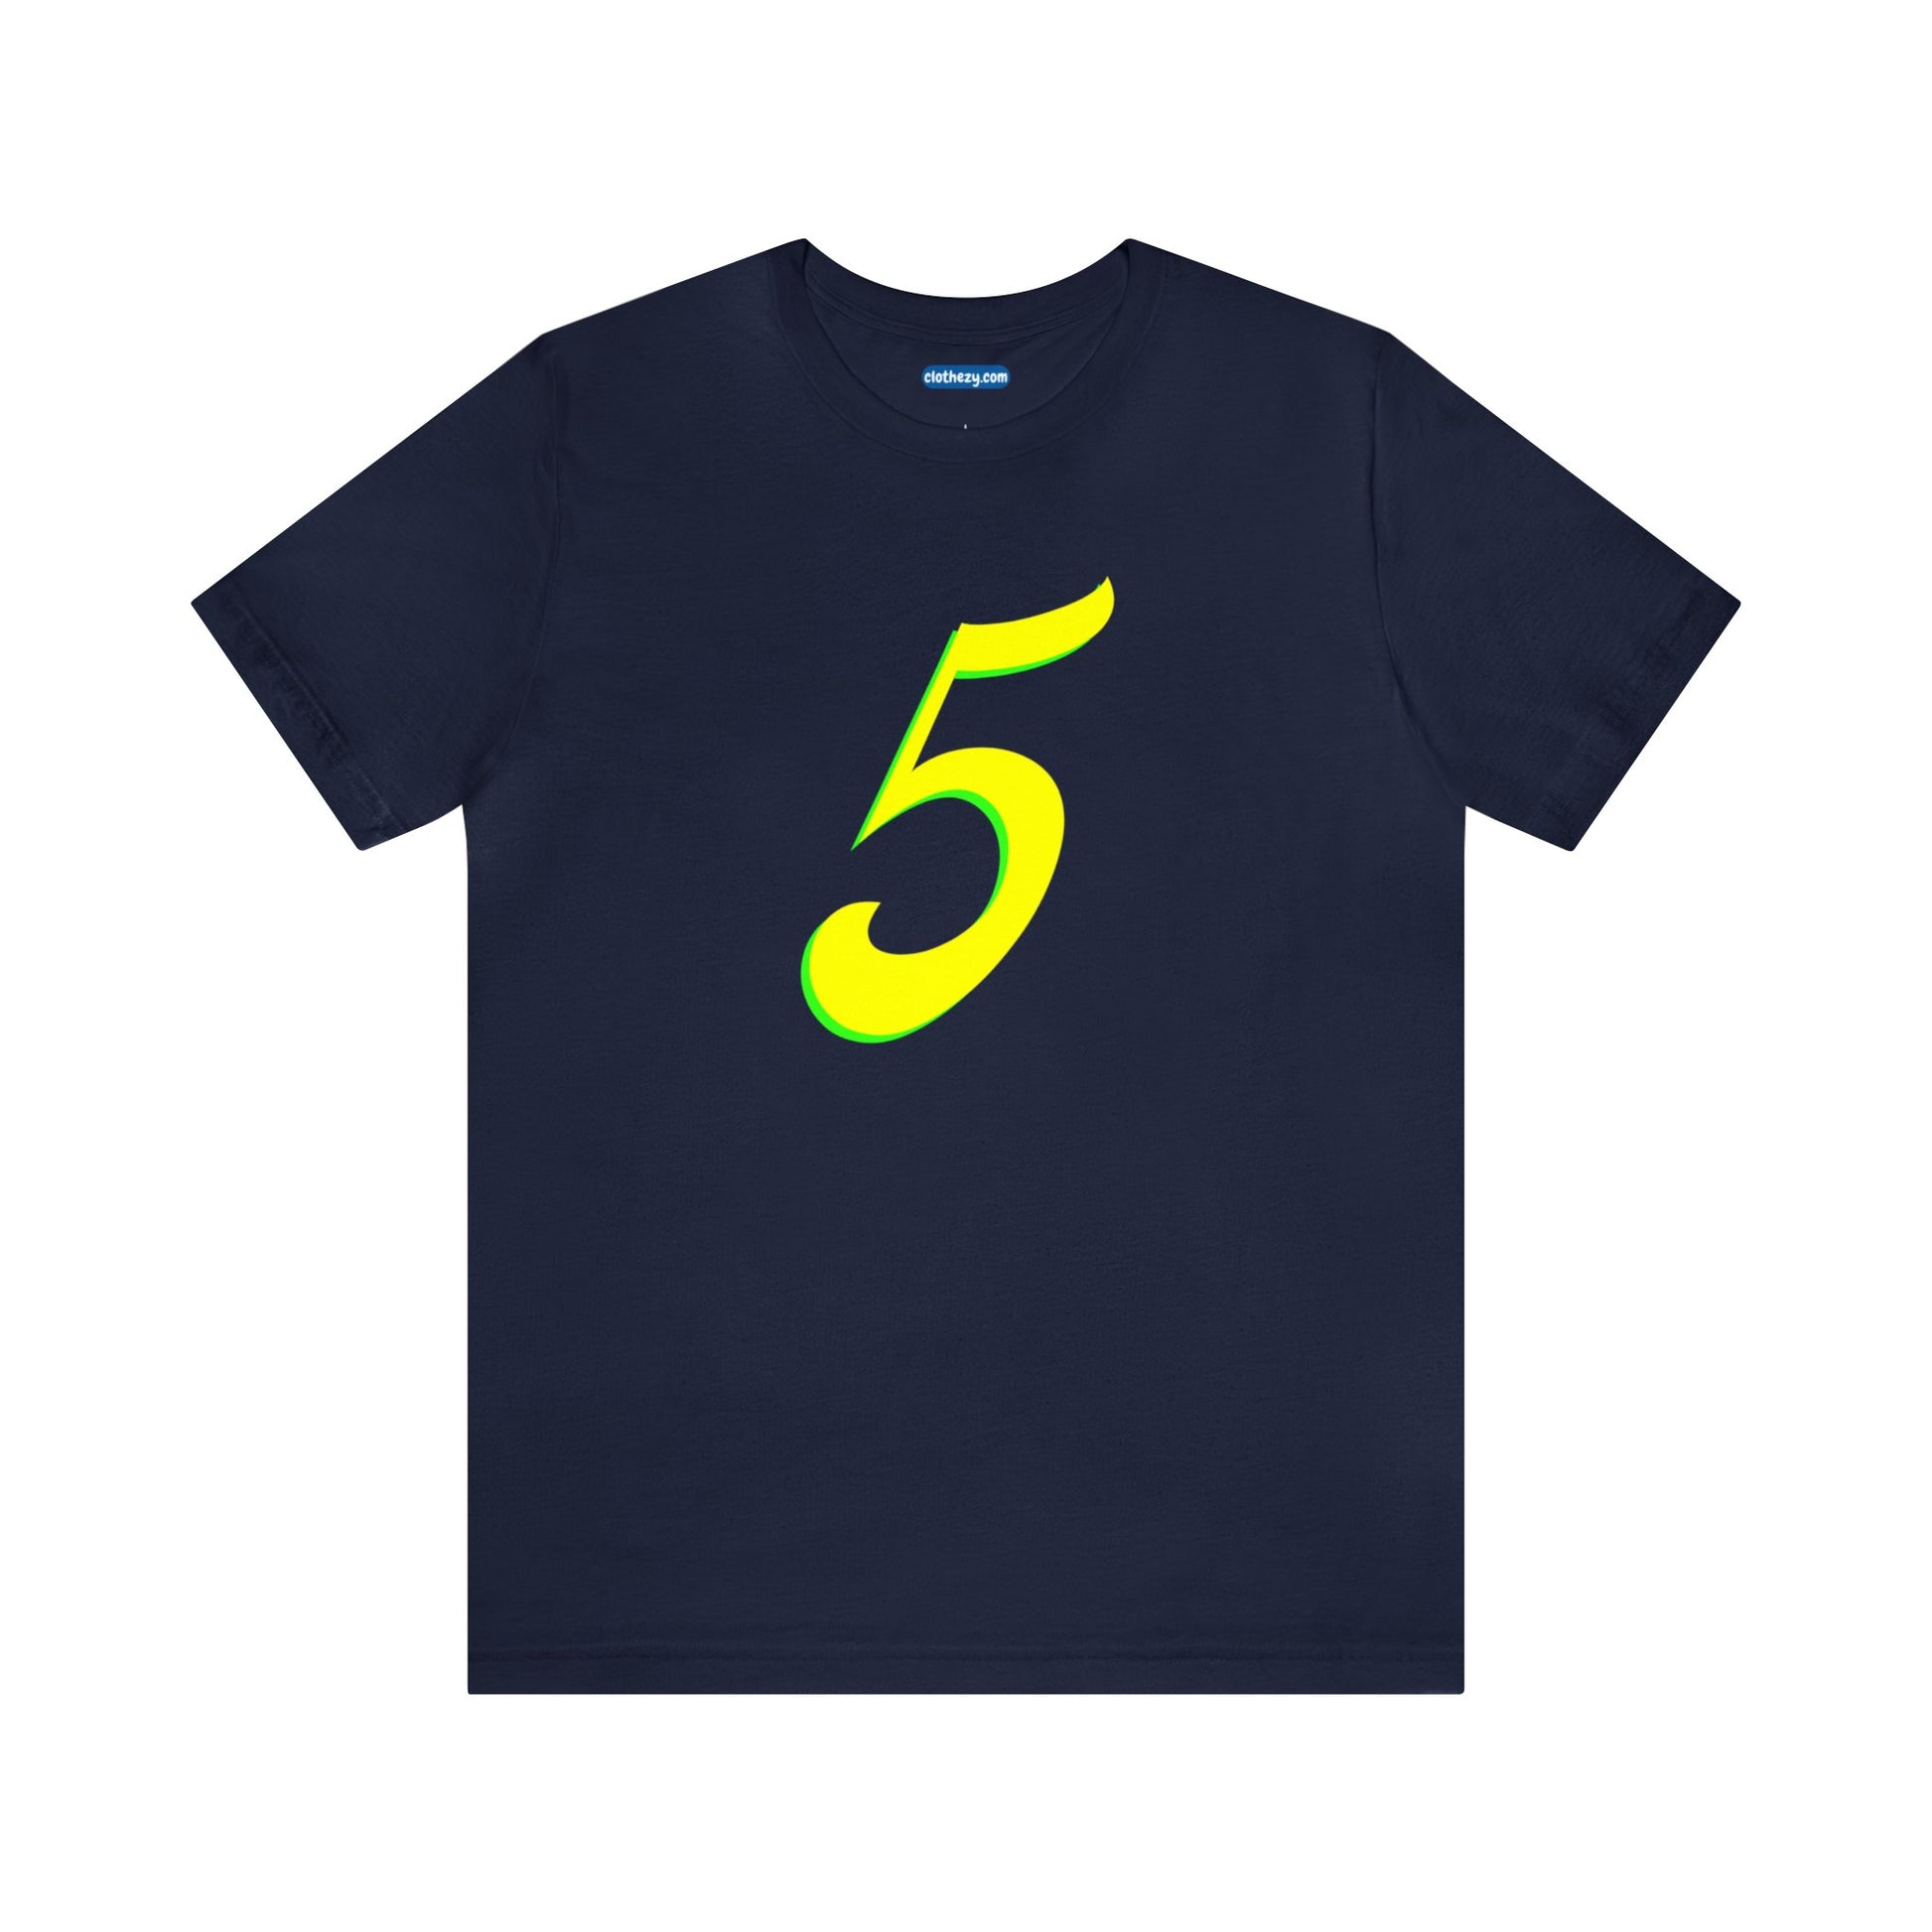 Number 5 Design - Soft Cotton Tee for birthdays and celebrations, Gift for friends and family, Multiple Options by clothezy.com in Navy Size Small - Buy Now